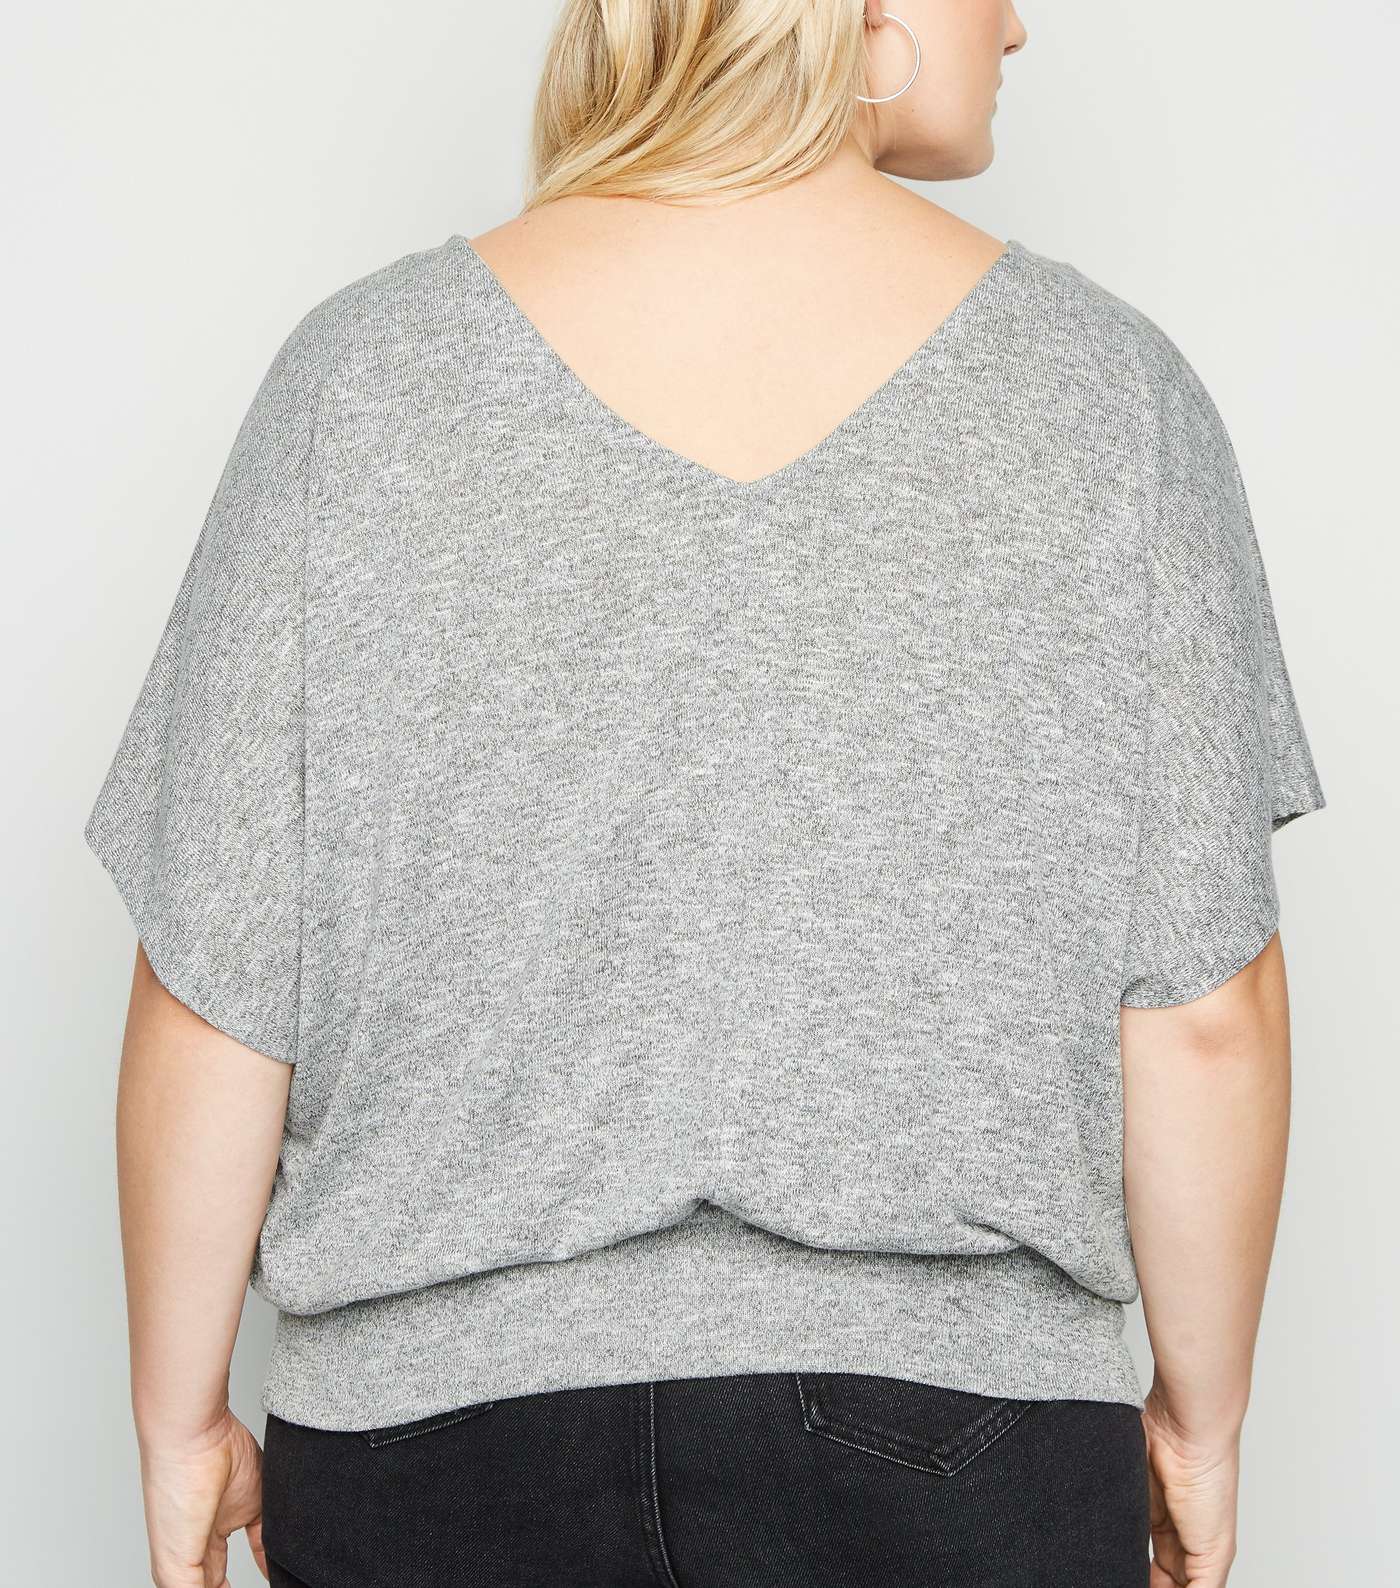 Curves Pale Grey Fine Knit Batwing Top Image 3